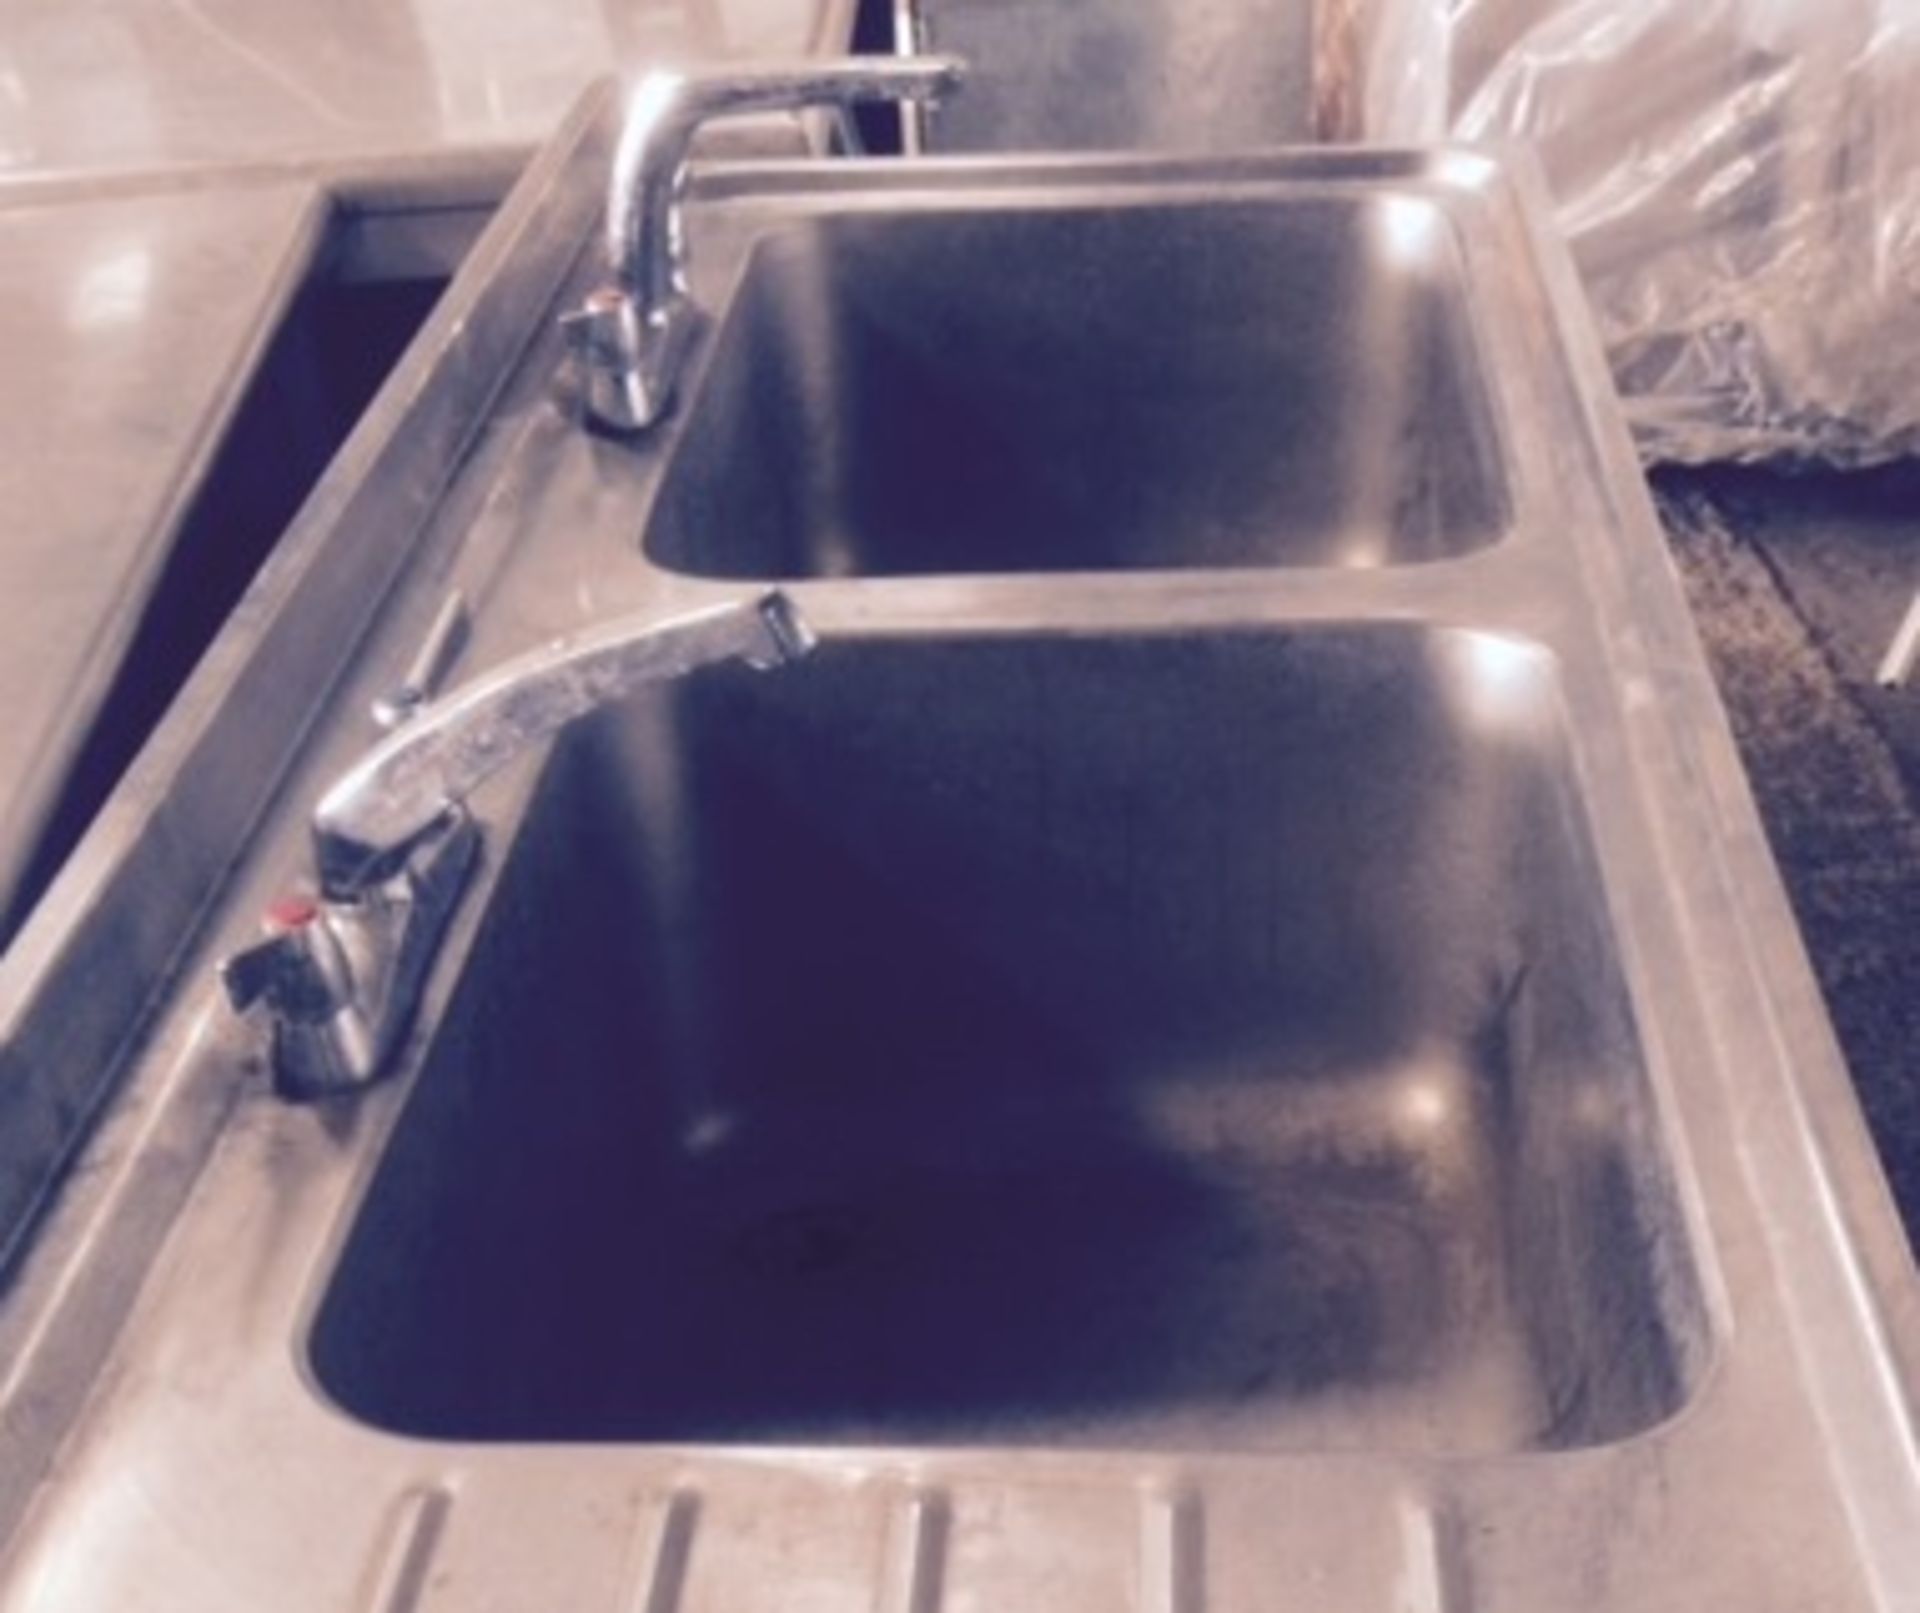 1 x Stainless Steel Commercial Catering Twin Sink Couinter Unit With Mixer Taps and Undershelf - H84 - Image 2 of 3